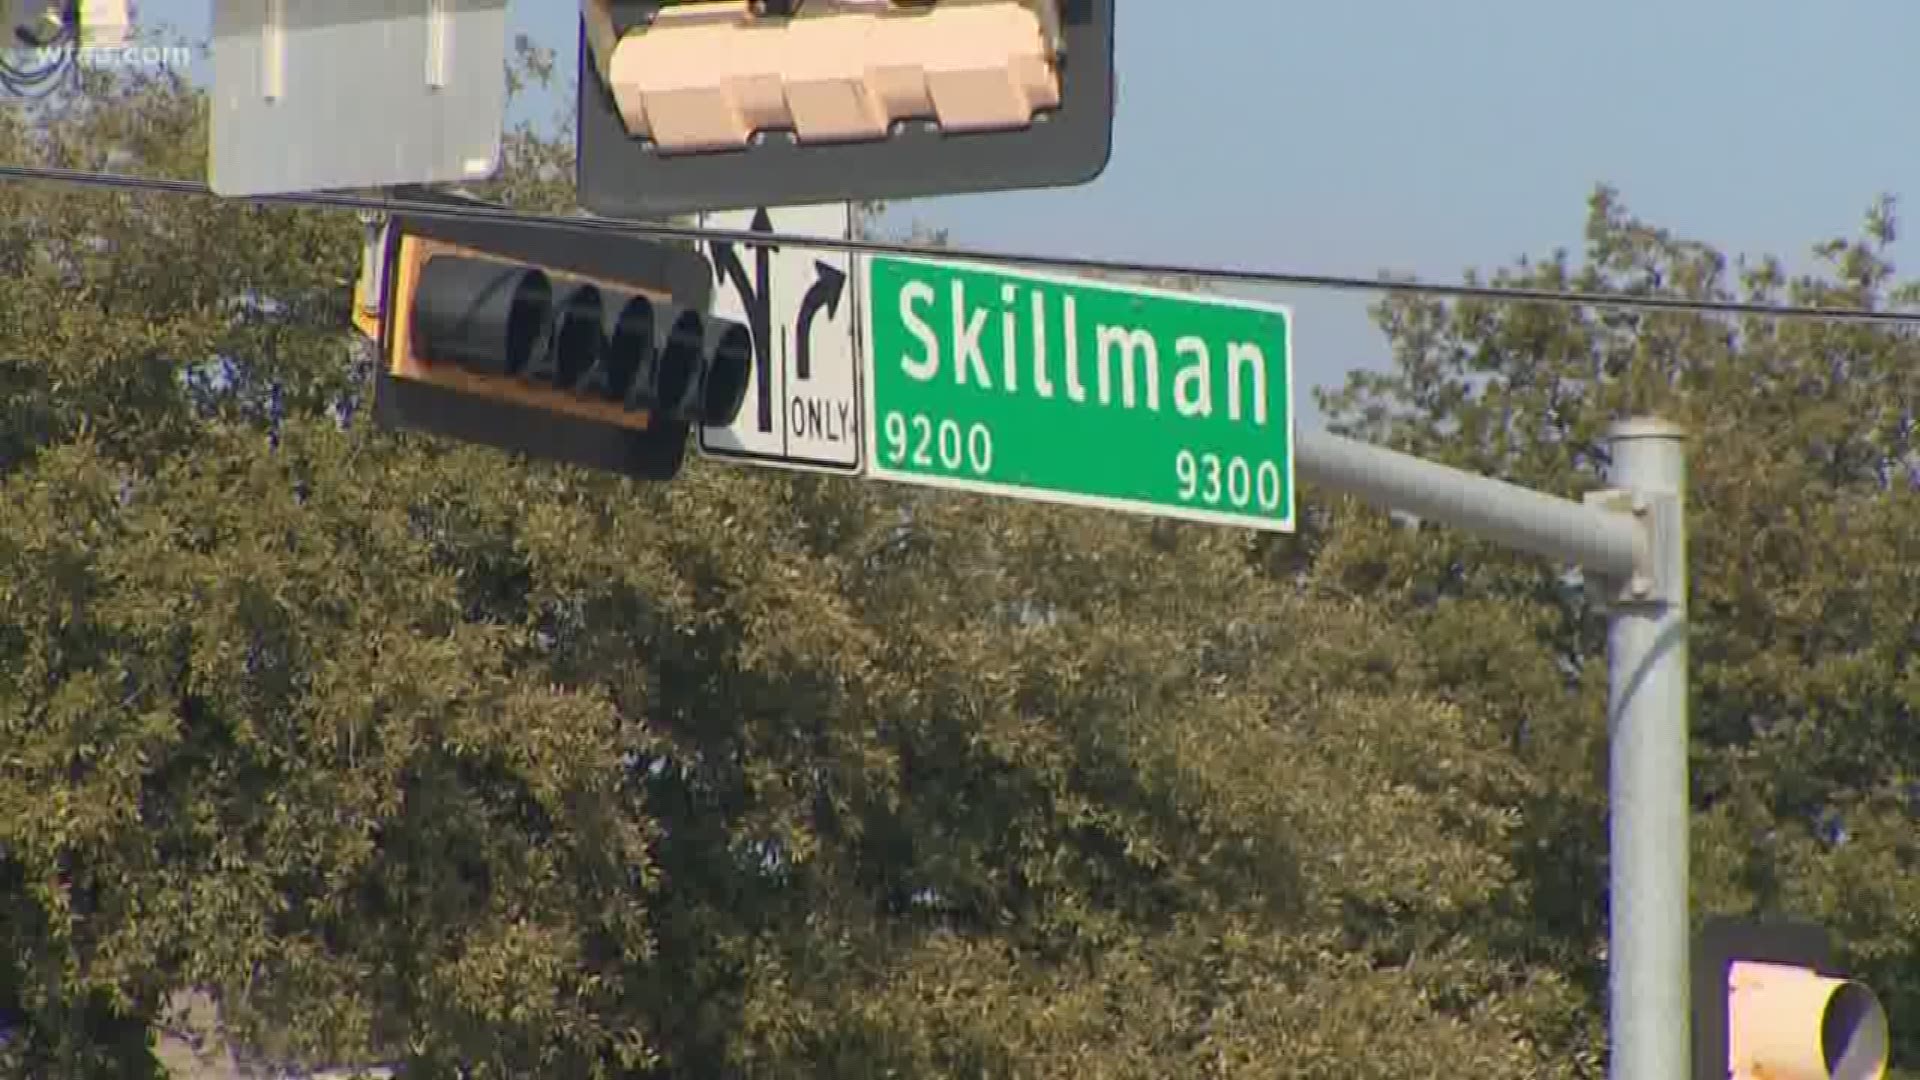 The 7-year-old child was struck by a vehicle in the 9300 block of Skillman Street near Leisure Drive as he attempted to cross the street with several other children, officials say.